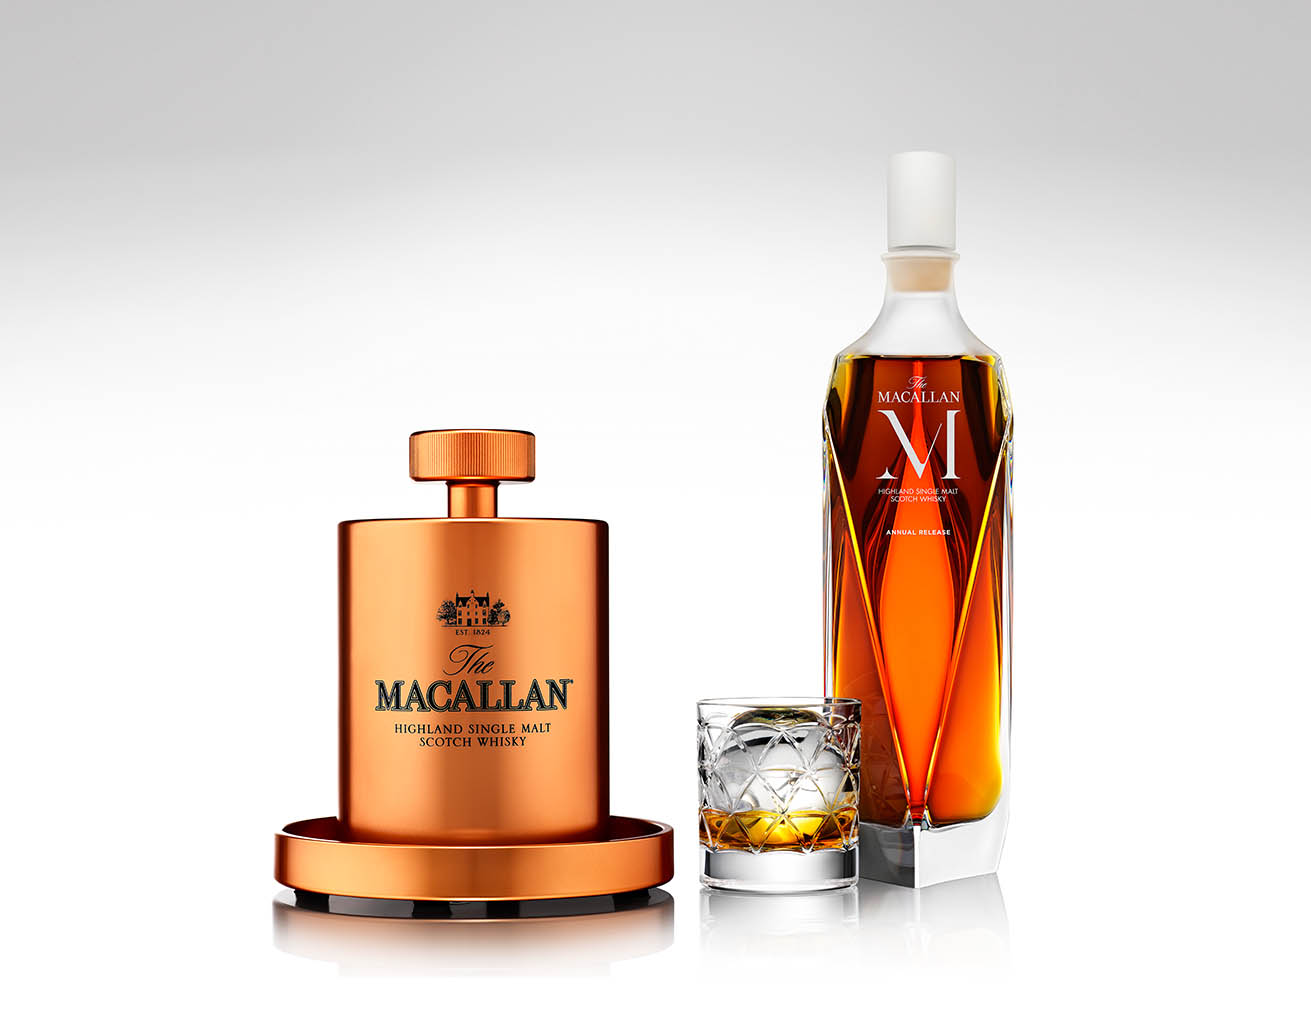 Advertising Still Life Product Photography of Macallan whisky bottle and serve by Packshot Factory